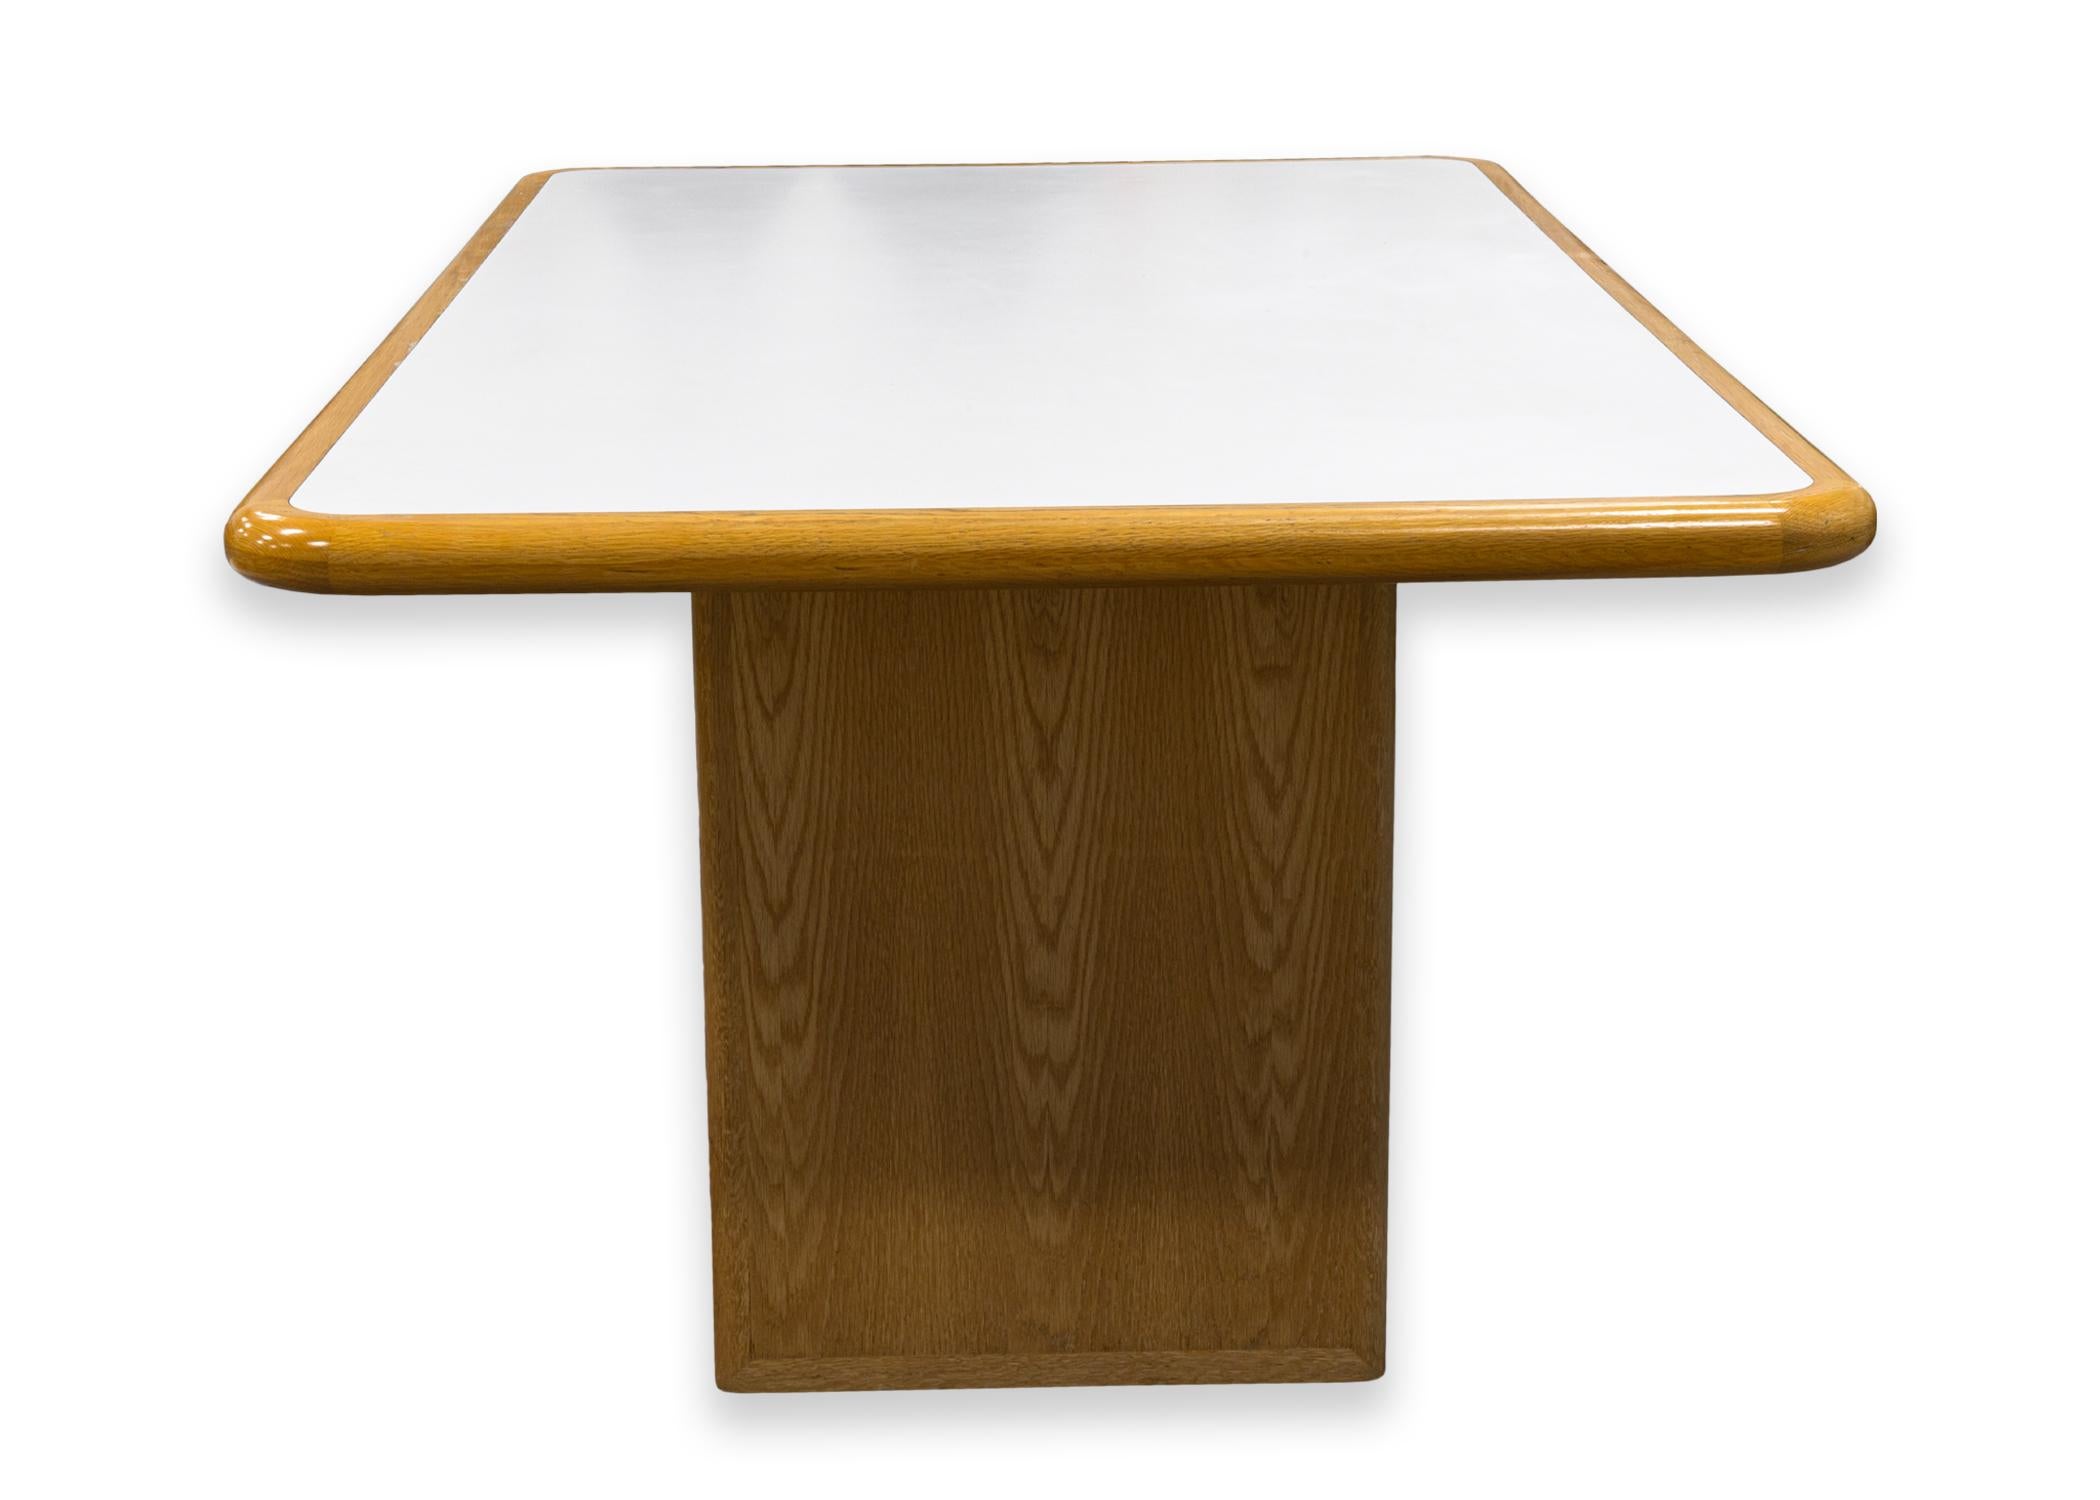 A vintage custom made Tobocman dining table. This is a gorgeous custom made table featuring a rounded rectangular shape, two thick pedestal legs, and a white laminate table top with a light wood frame. This table is in very good condition with some